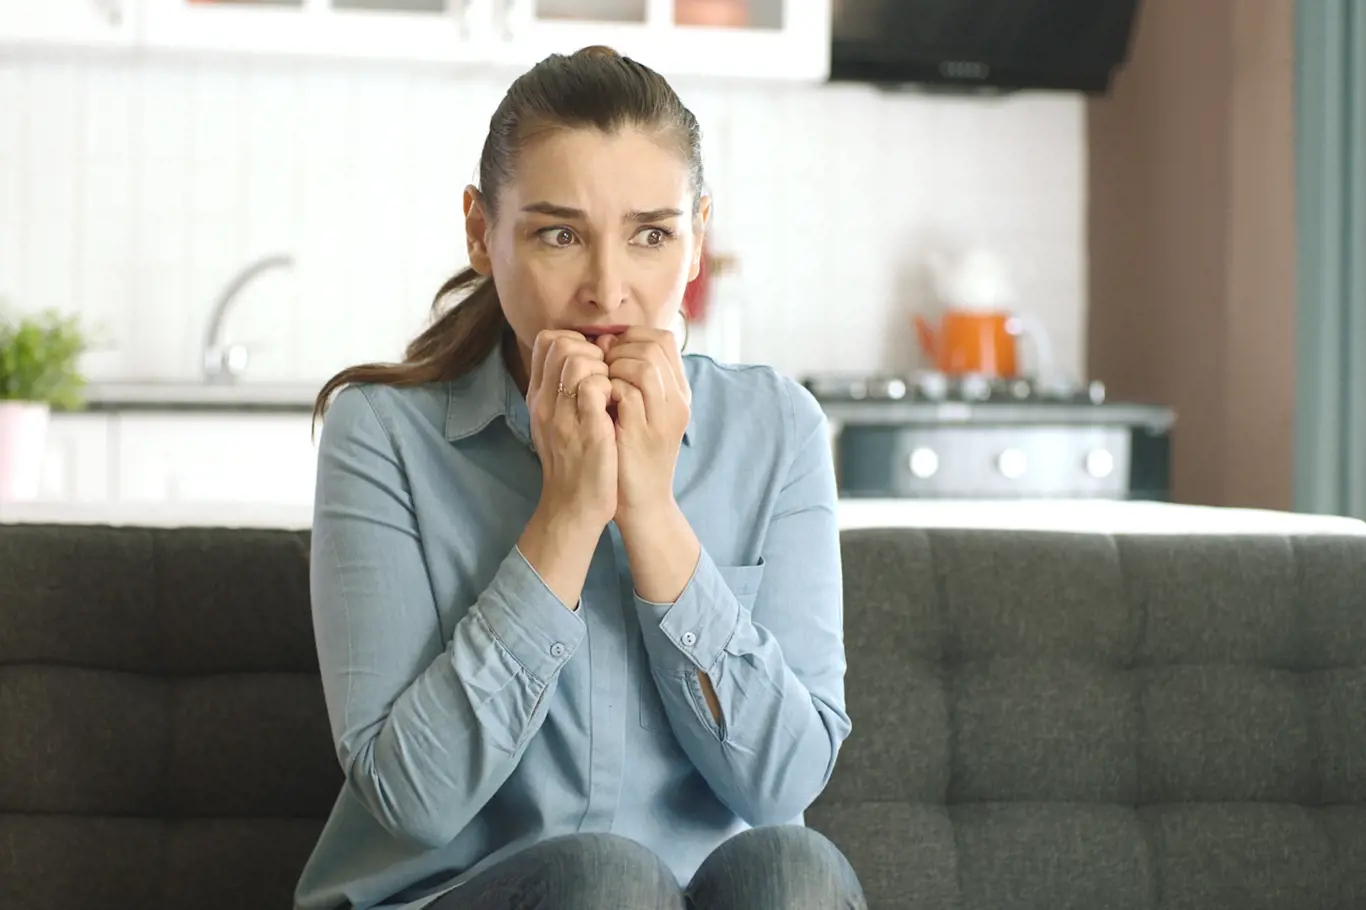 Nervous woman feeling panic, biting her nails, feeling anxious and confused. Frustrated and stressed woman waiting for someone at home. Angry woman biting her nails. Feelings of anxiety, fear.